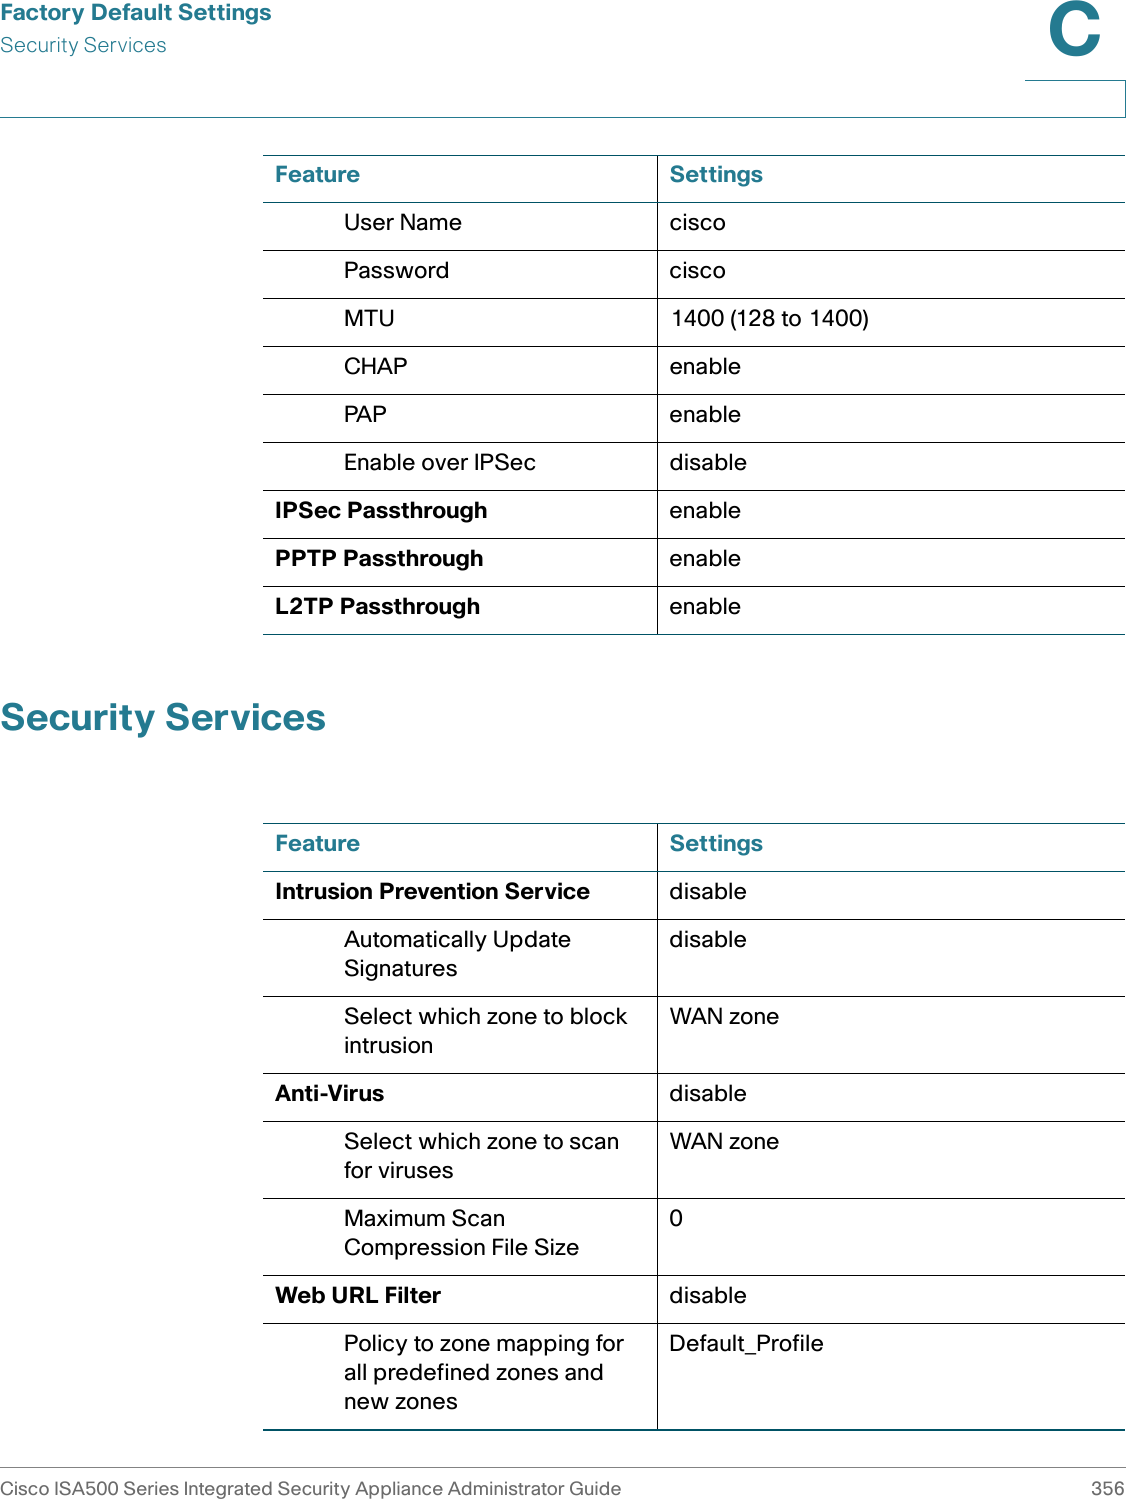 Factory Default SettingsSecurity ServicesCisco ISA500 Series Integrated Security Appliance Administrator Guide 356C Security ServicesUser Name ciscoPassword ciscoMTU 1400 (128 to 1400)CHAP enablePAP enableEnable over IPSec disableIPSec Passthrough enablePPTP Passthrough enableL2TP Passthrough enableFeature SettingsFeature SettingsIntrusion Prevention Service disableAutomatically Update SignaturesdisableSelect which zone to block intrusionWAN zoneAnti-Virus disableSelect which zone to scan for virusesWAN zoneMaximum Scan Compression File Size0Web URL Filter disablePolicy to zone mapping for all predefined zones and new zonesDefault_Profile